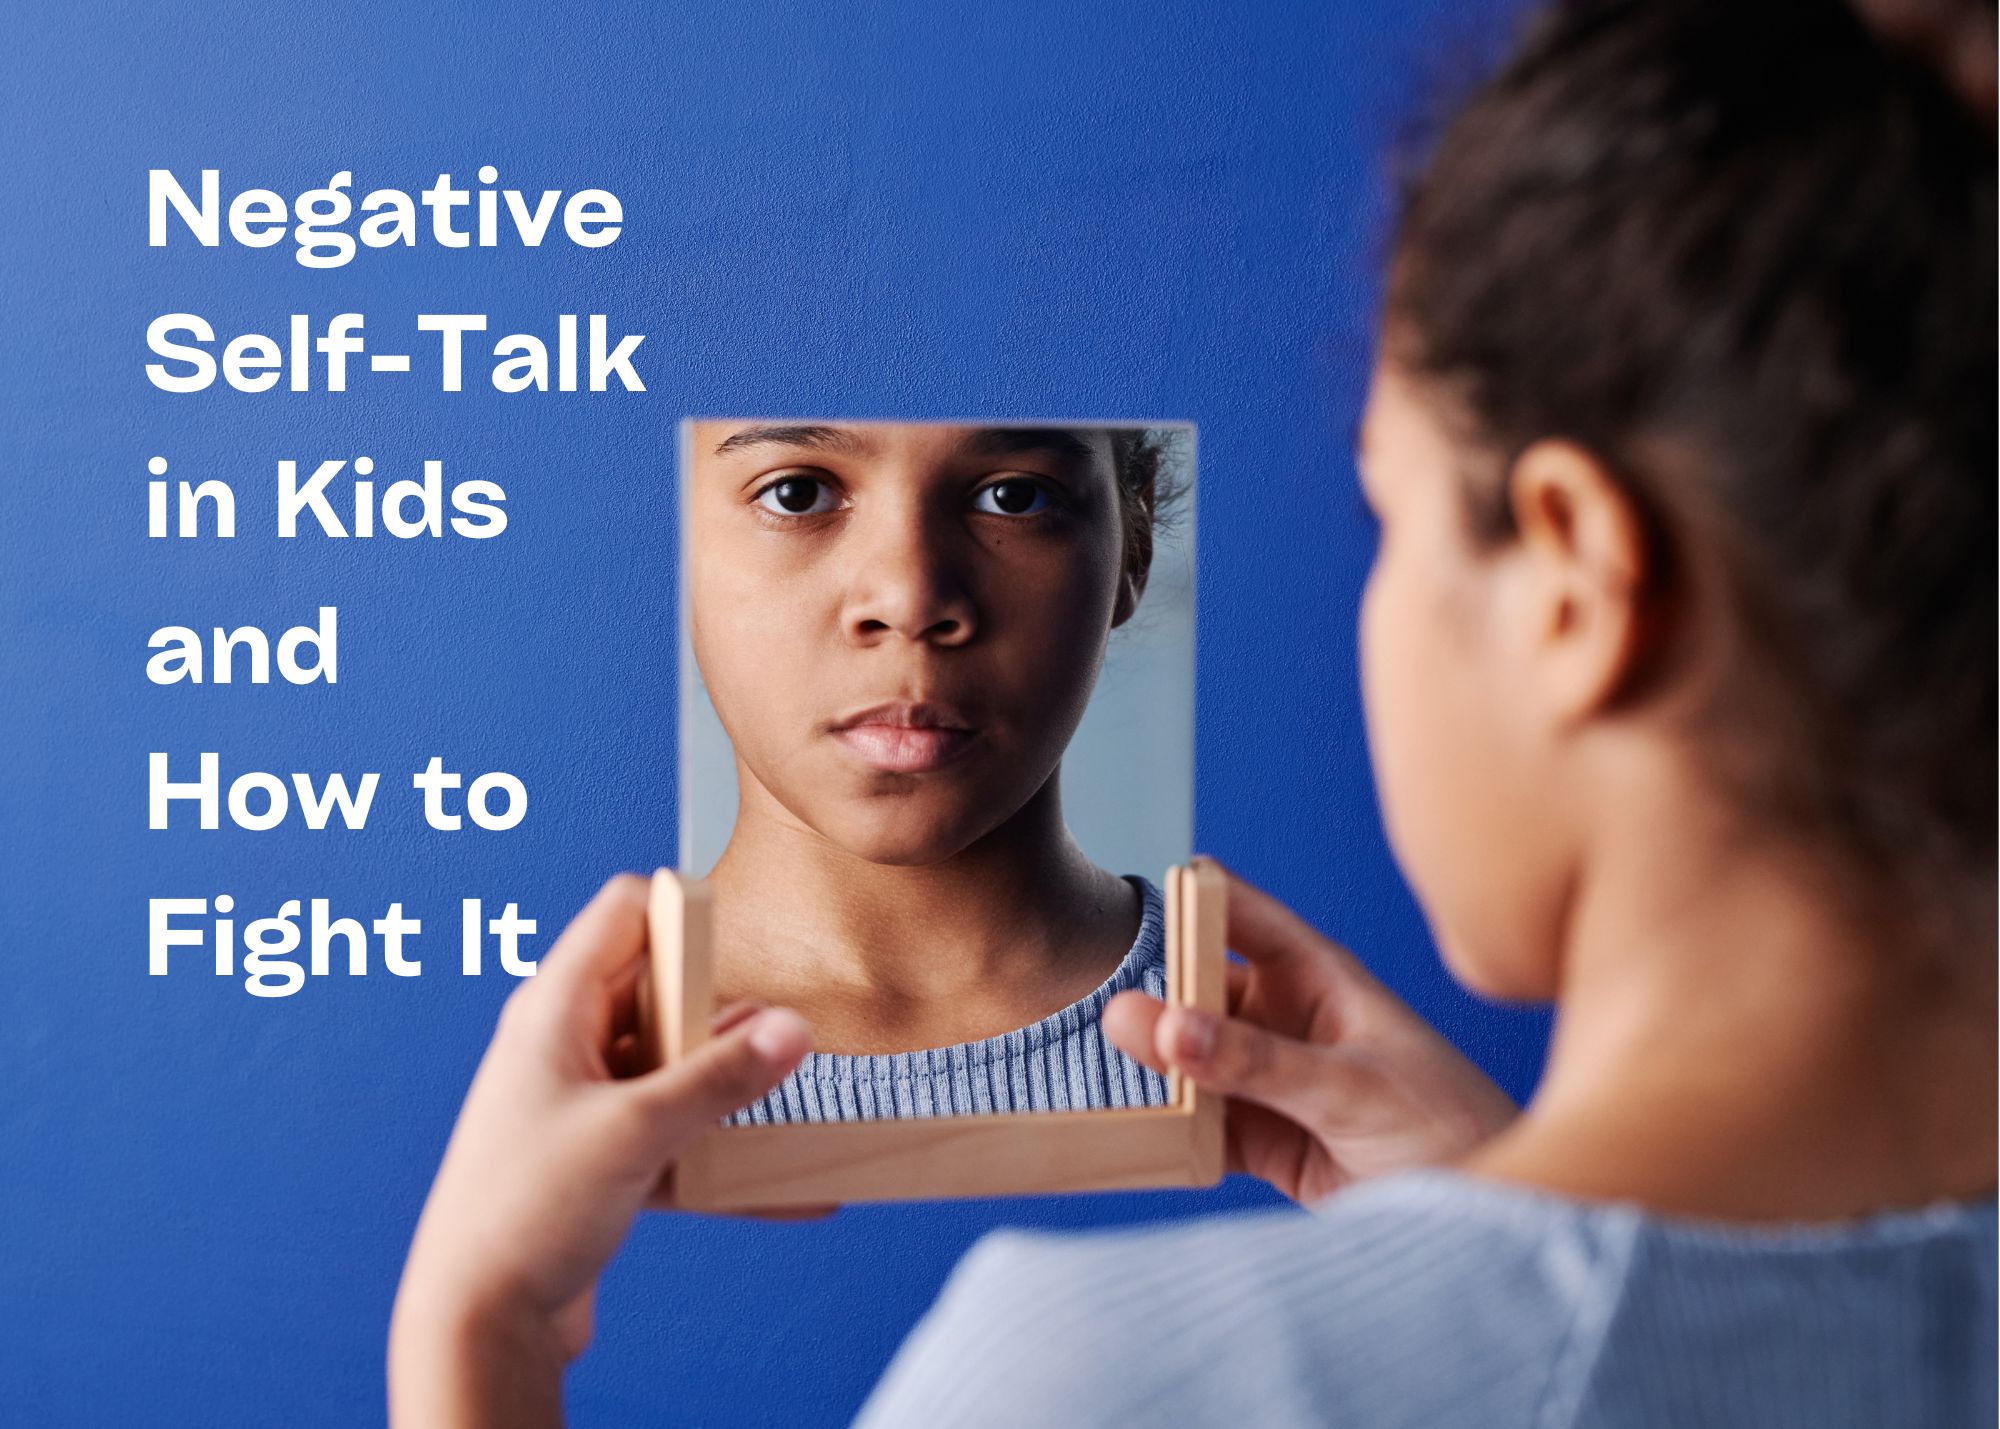 Negative Self-Talk in Kids and How to Fight It